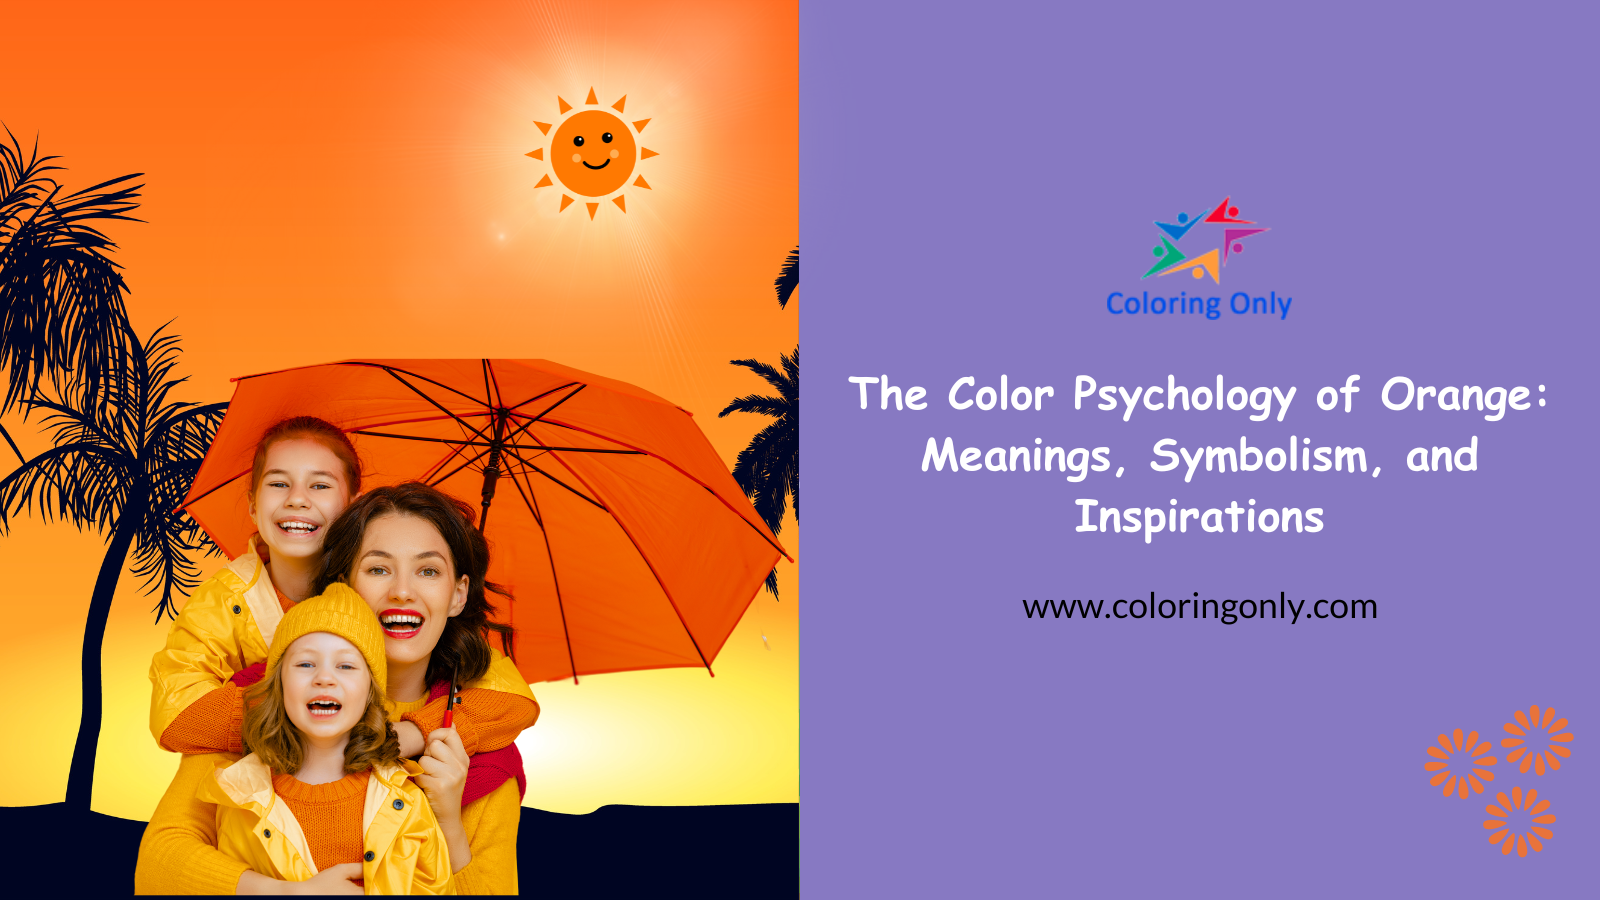 The Color Psychology of Orange: Meanings, Symbolism, and Inspirations